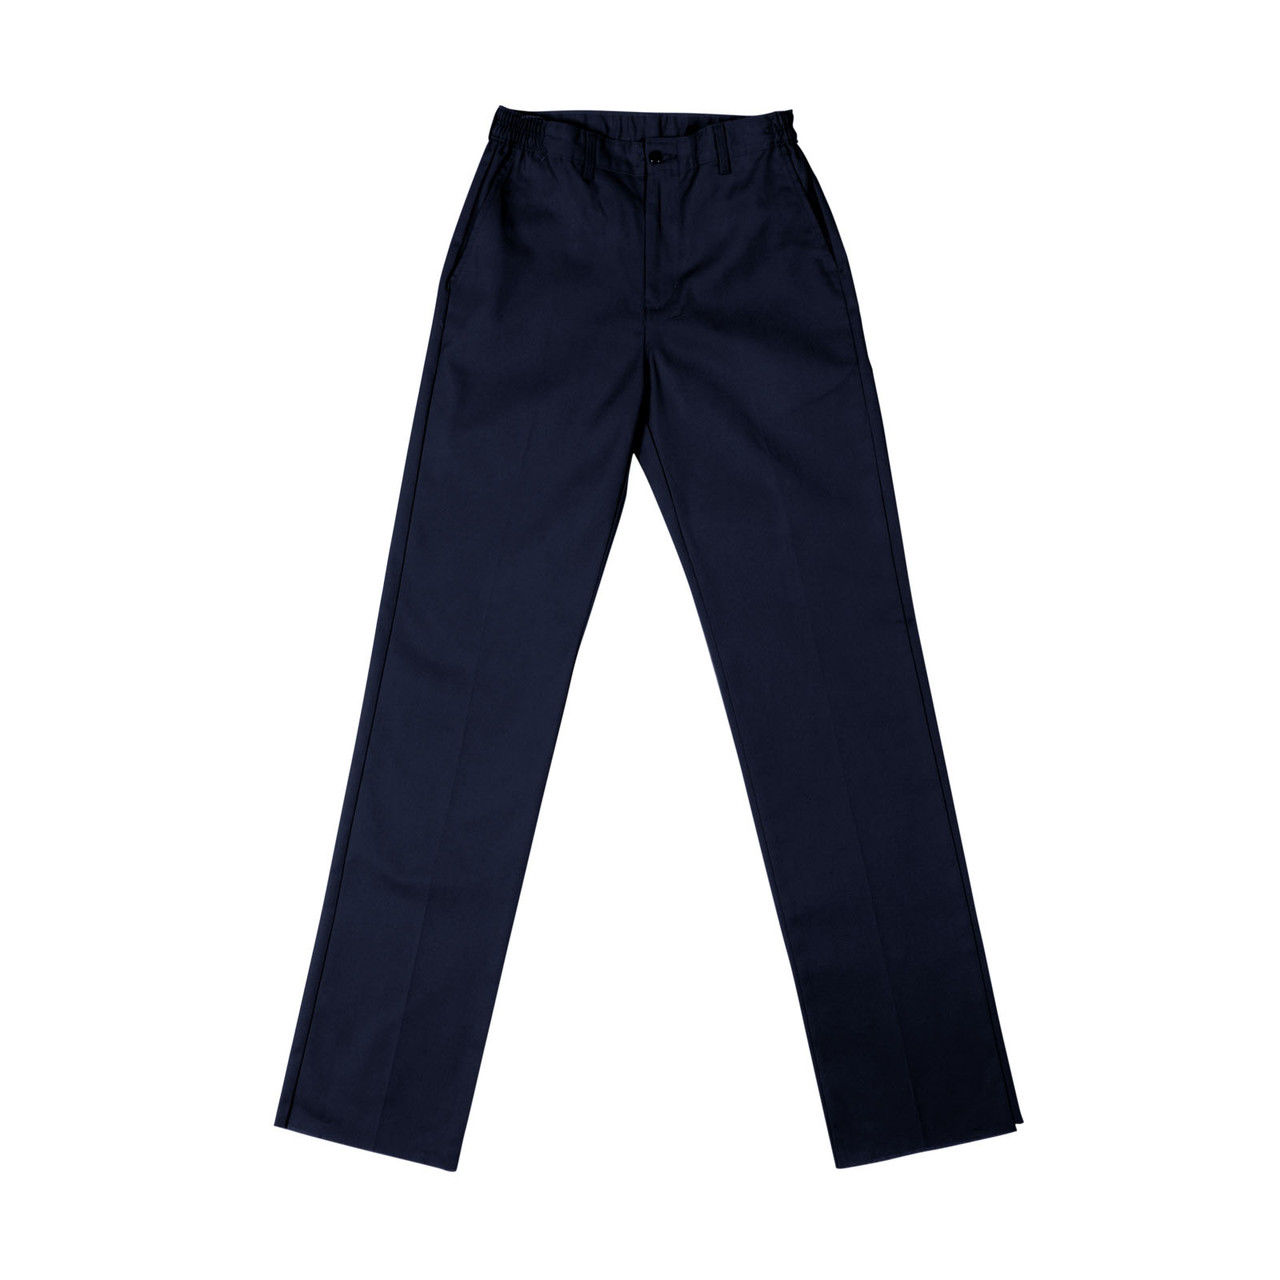 What is the design of the waistband in the P26 Navy Blue Women's Flex Waist Industrial Work Pants?